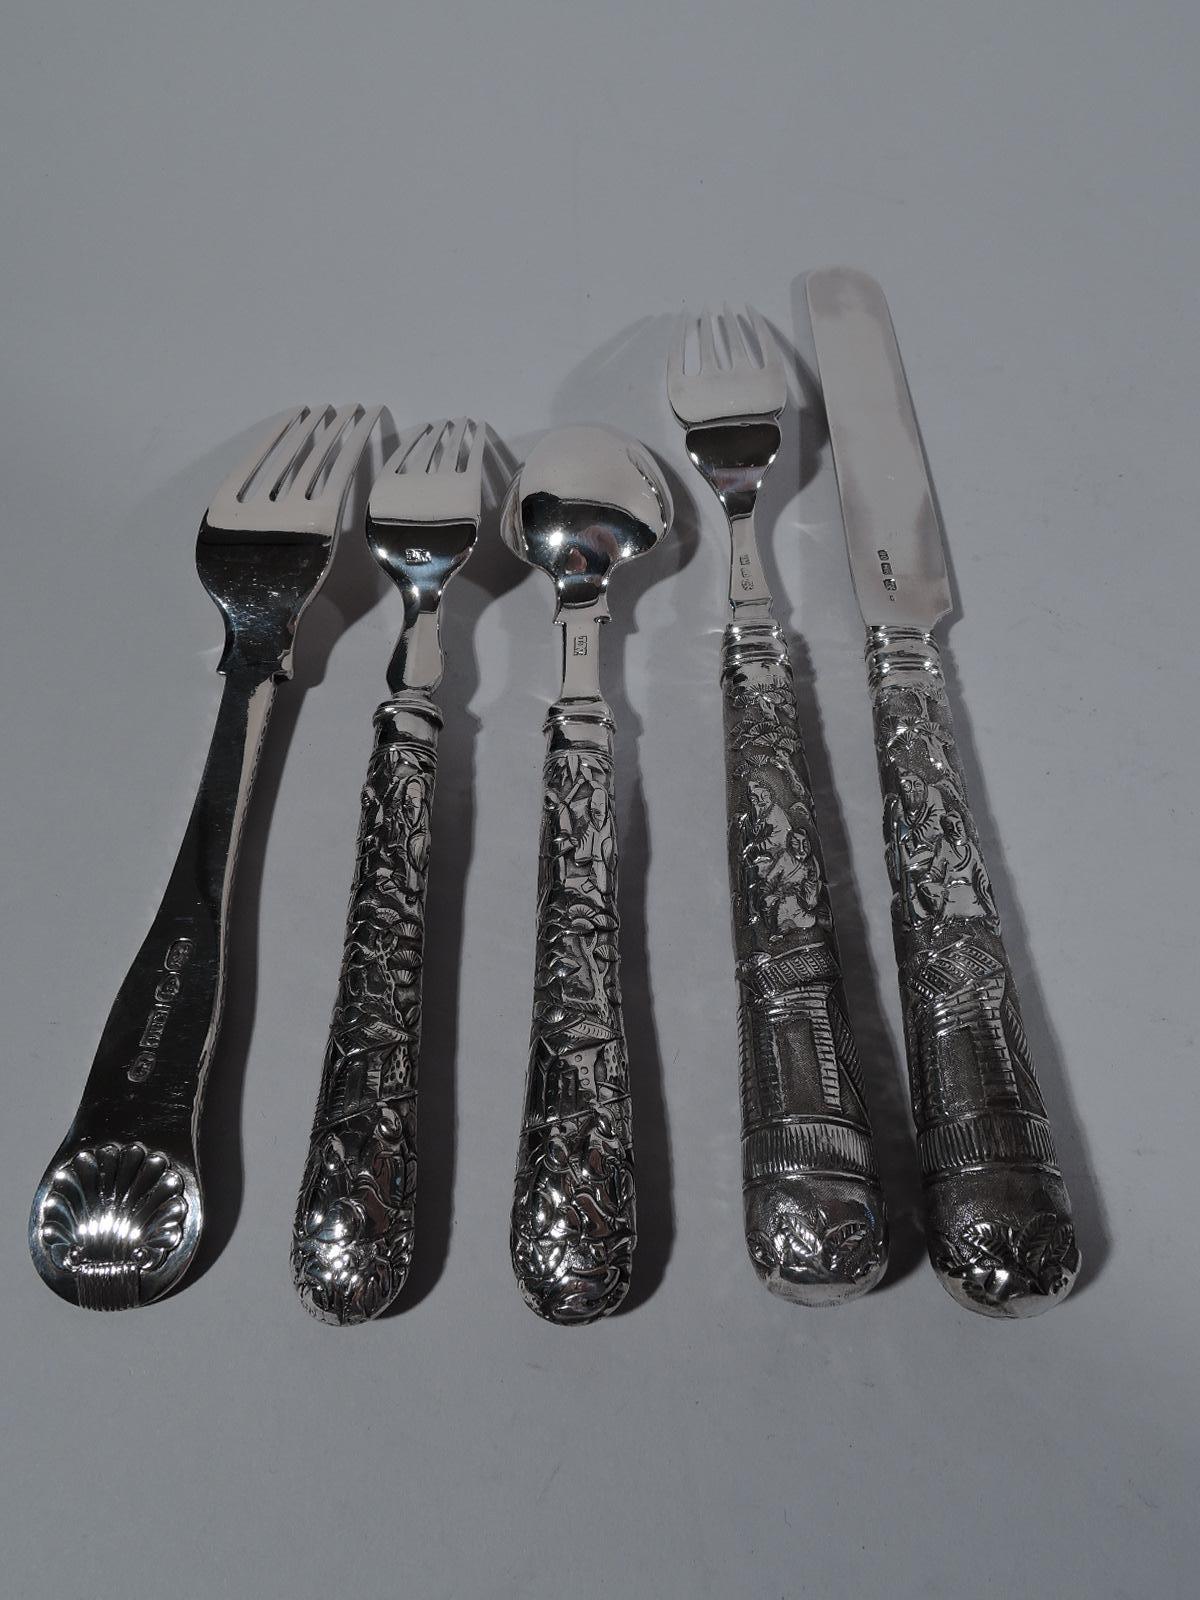 Turn-of-the-century Chinese export silver place setting with: (dimensions in inches) dinner fork (7 3/4), salad fork (6 3/4), spoon (6 5/8), and knife (8 1/2). Each: Hollow handle with chased exotic scenes: robed Chinamen, pagodas, and trees. Knife